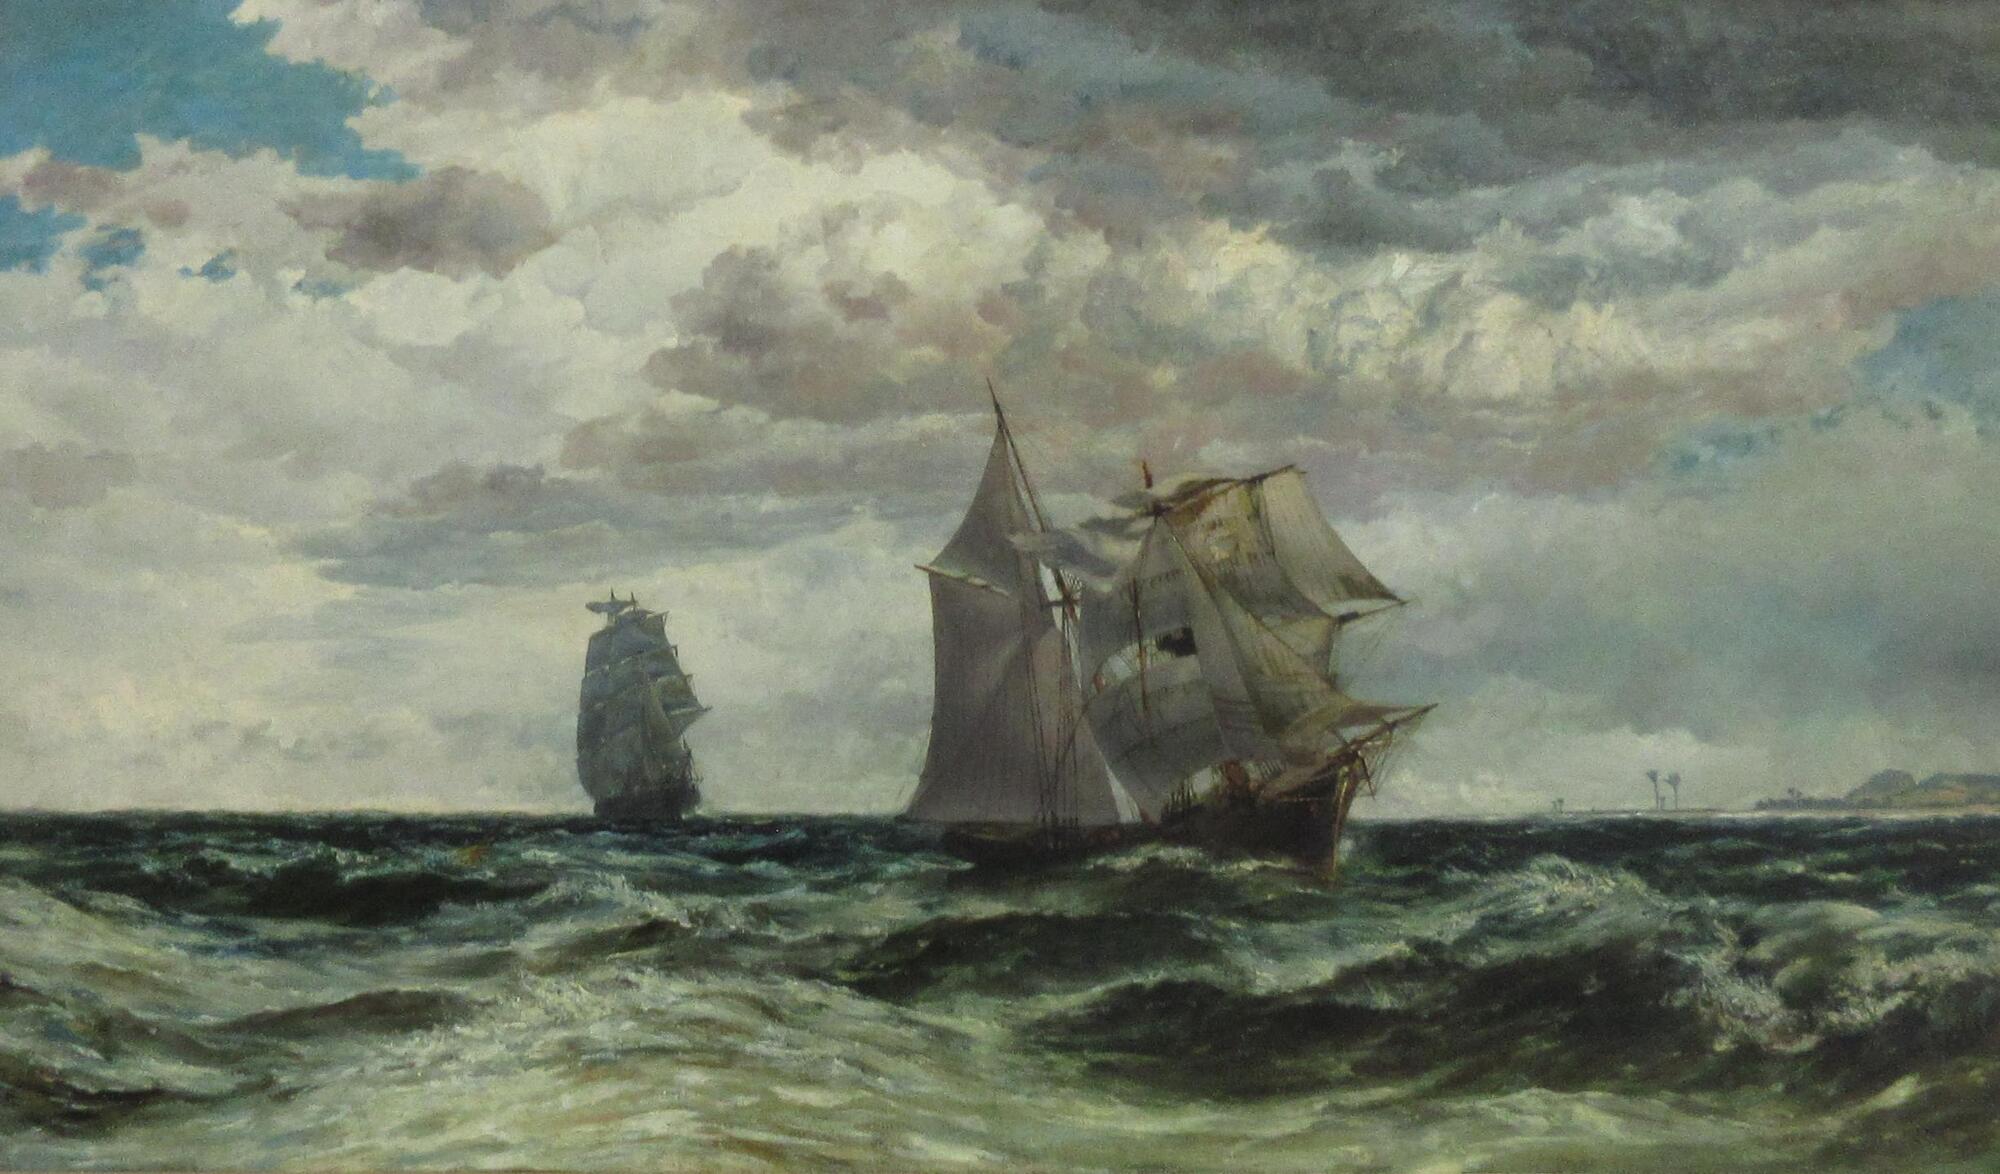 Ship chasing another ship. Shore on the right hand side of the painting.